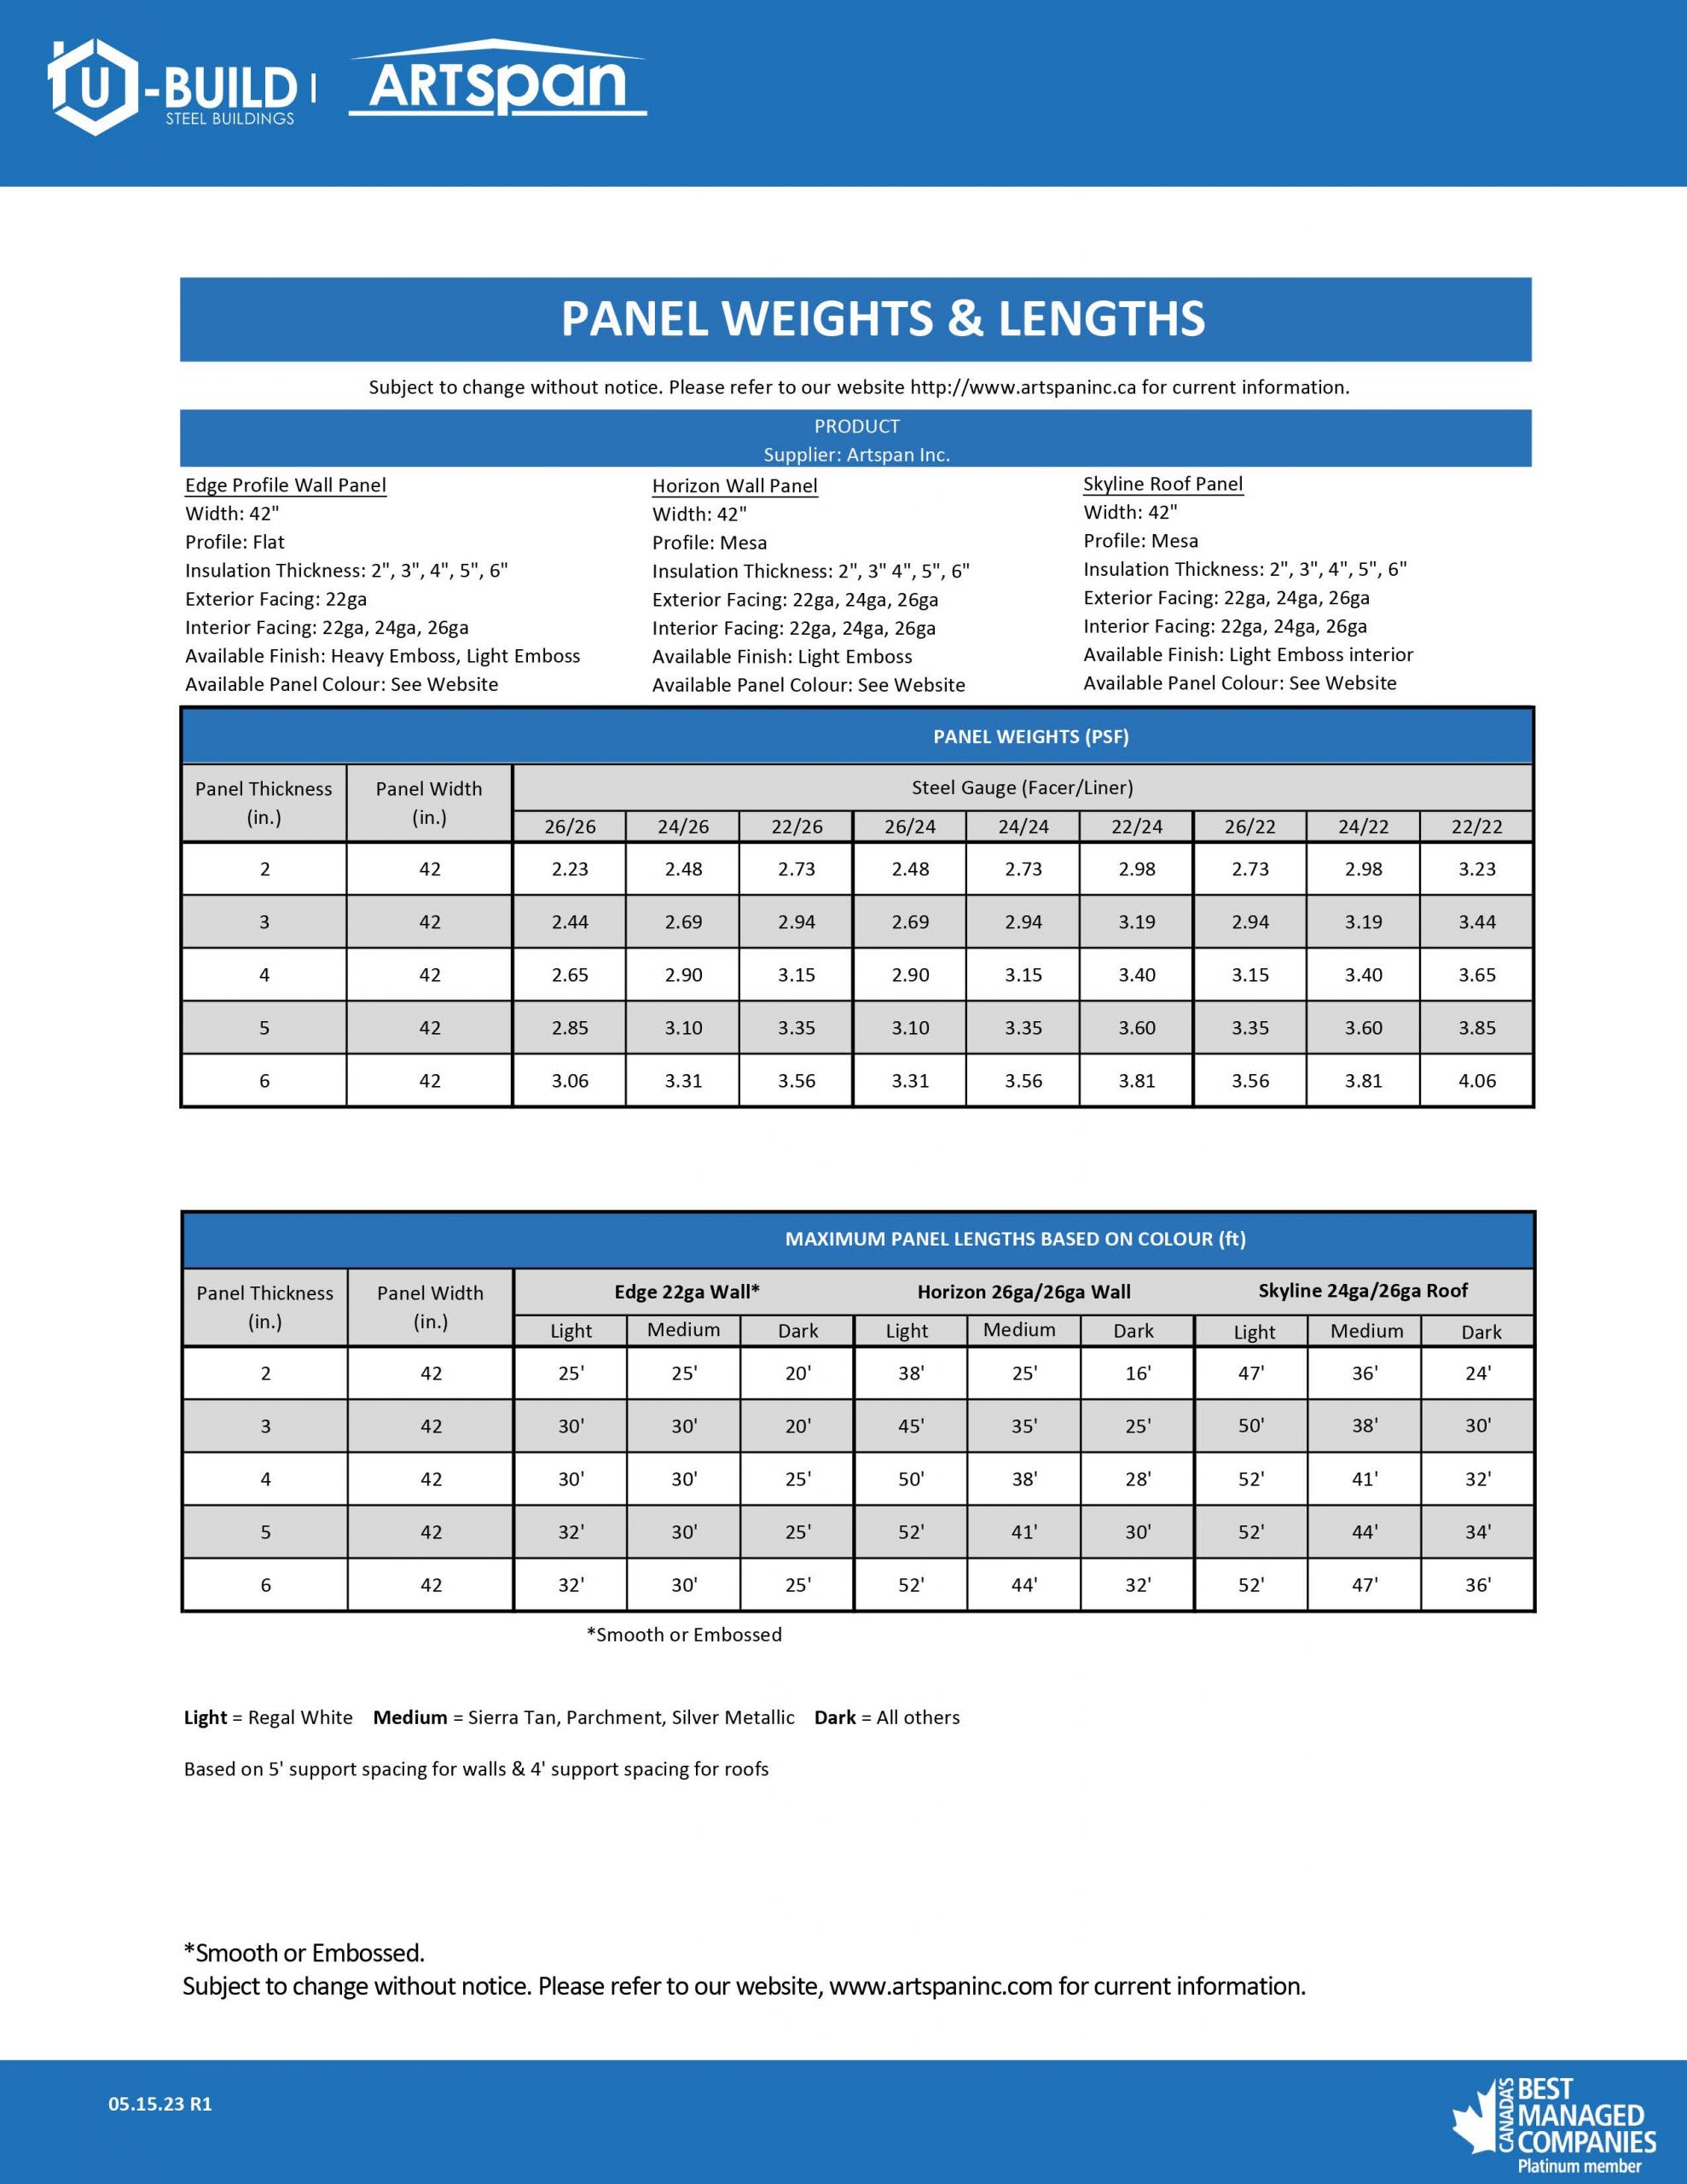 ARTSPAN Panel Weights & Lengths Pdf File Preview